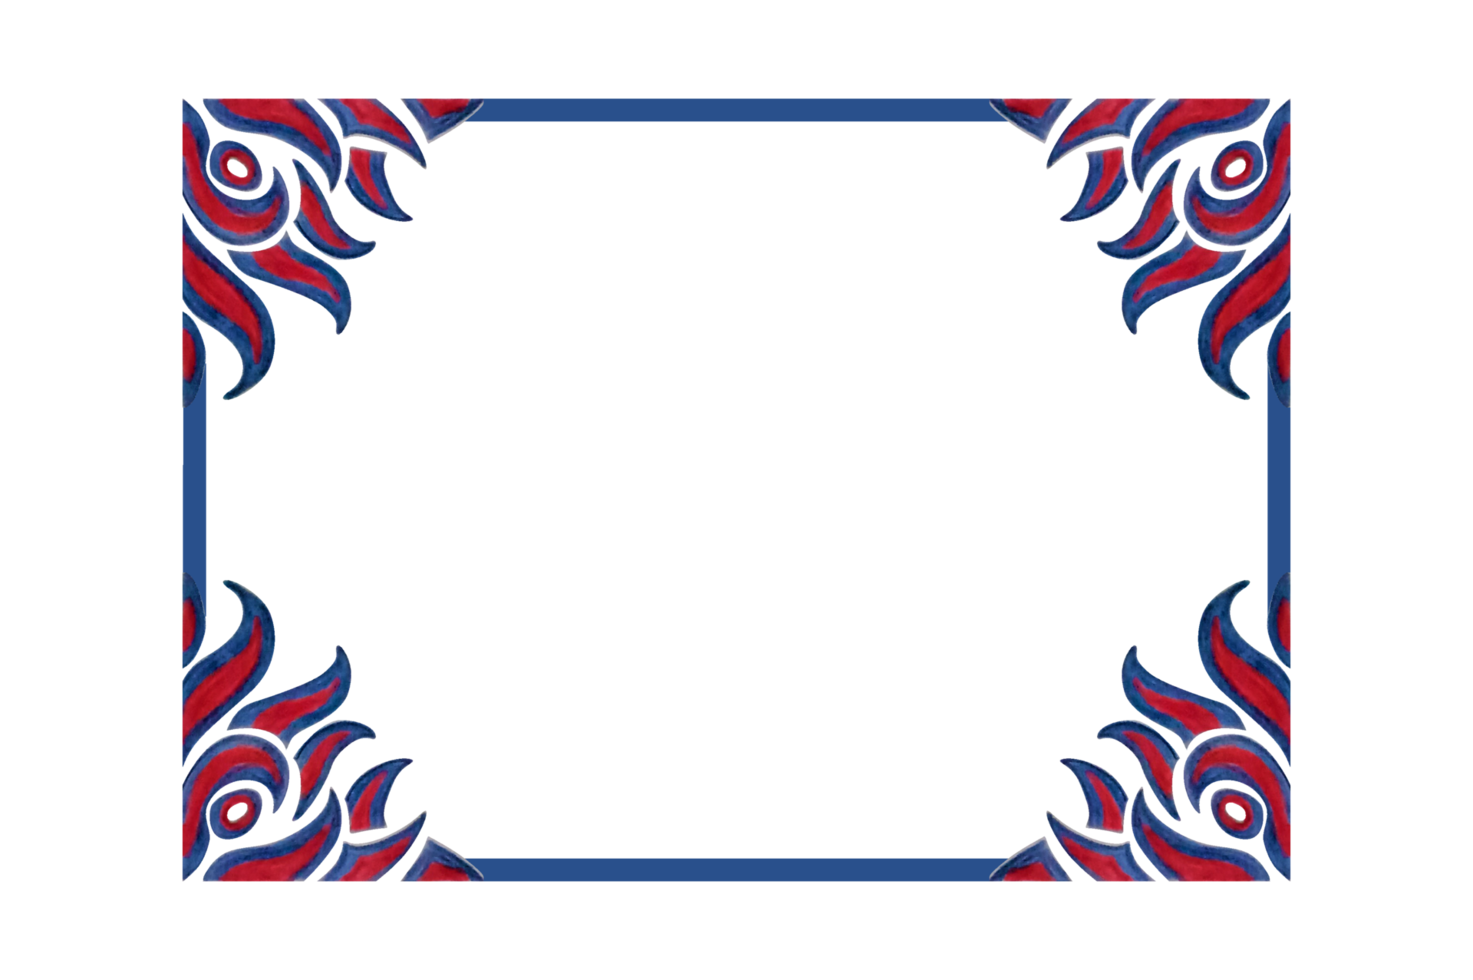 Ornament Border Design With Fire Theme png